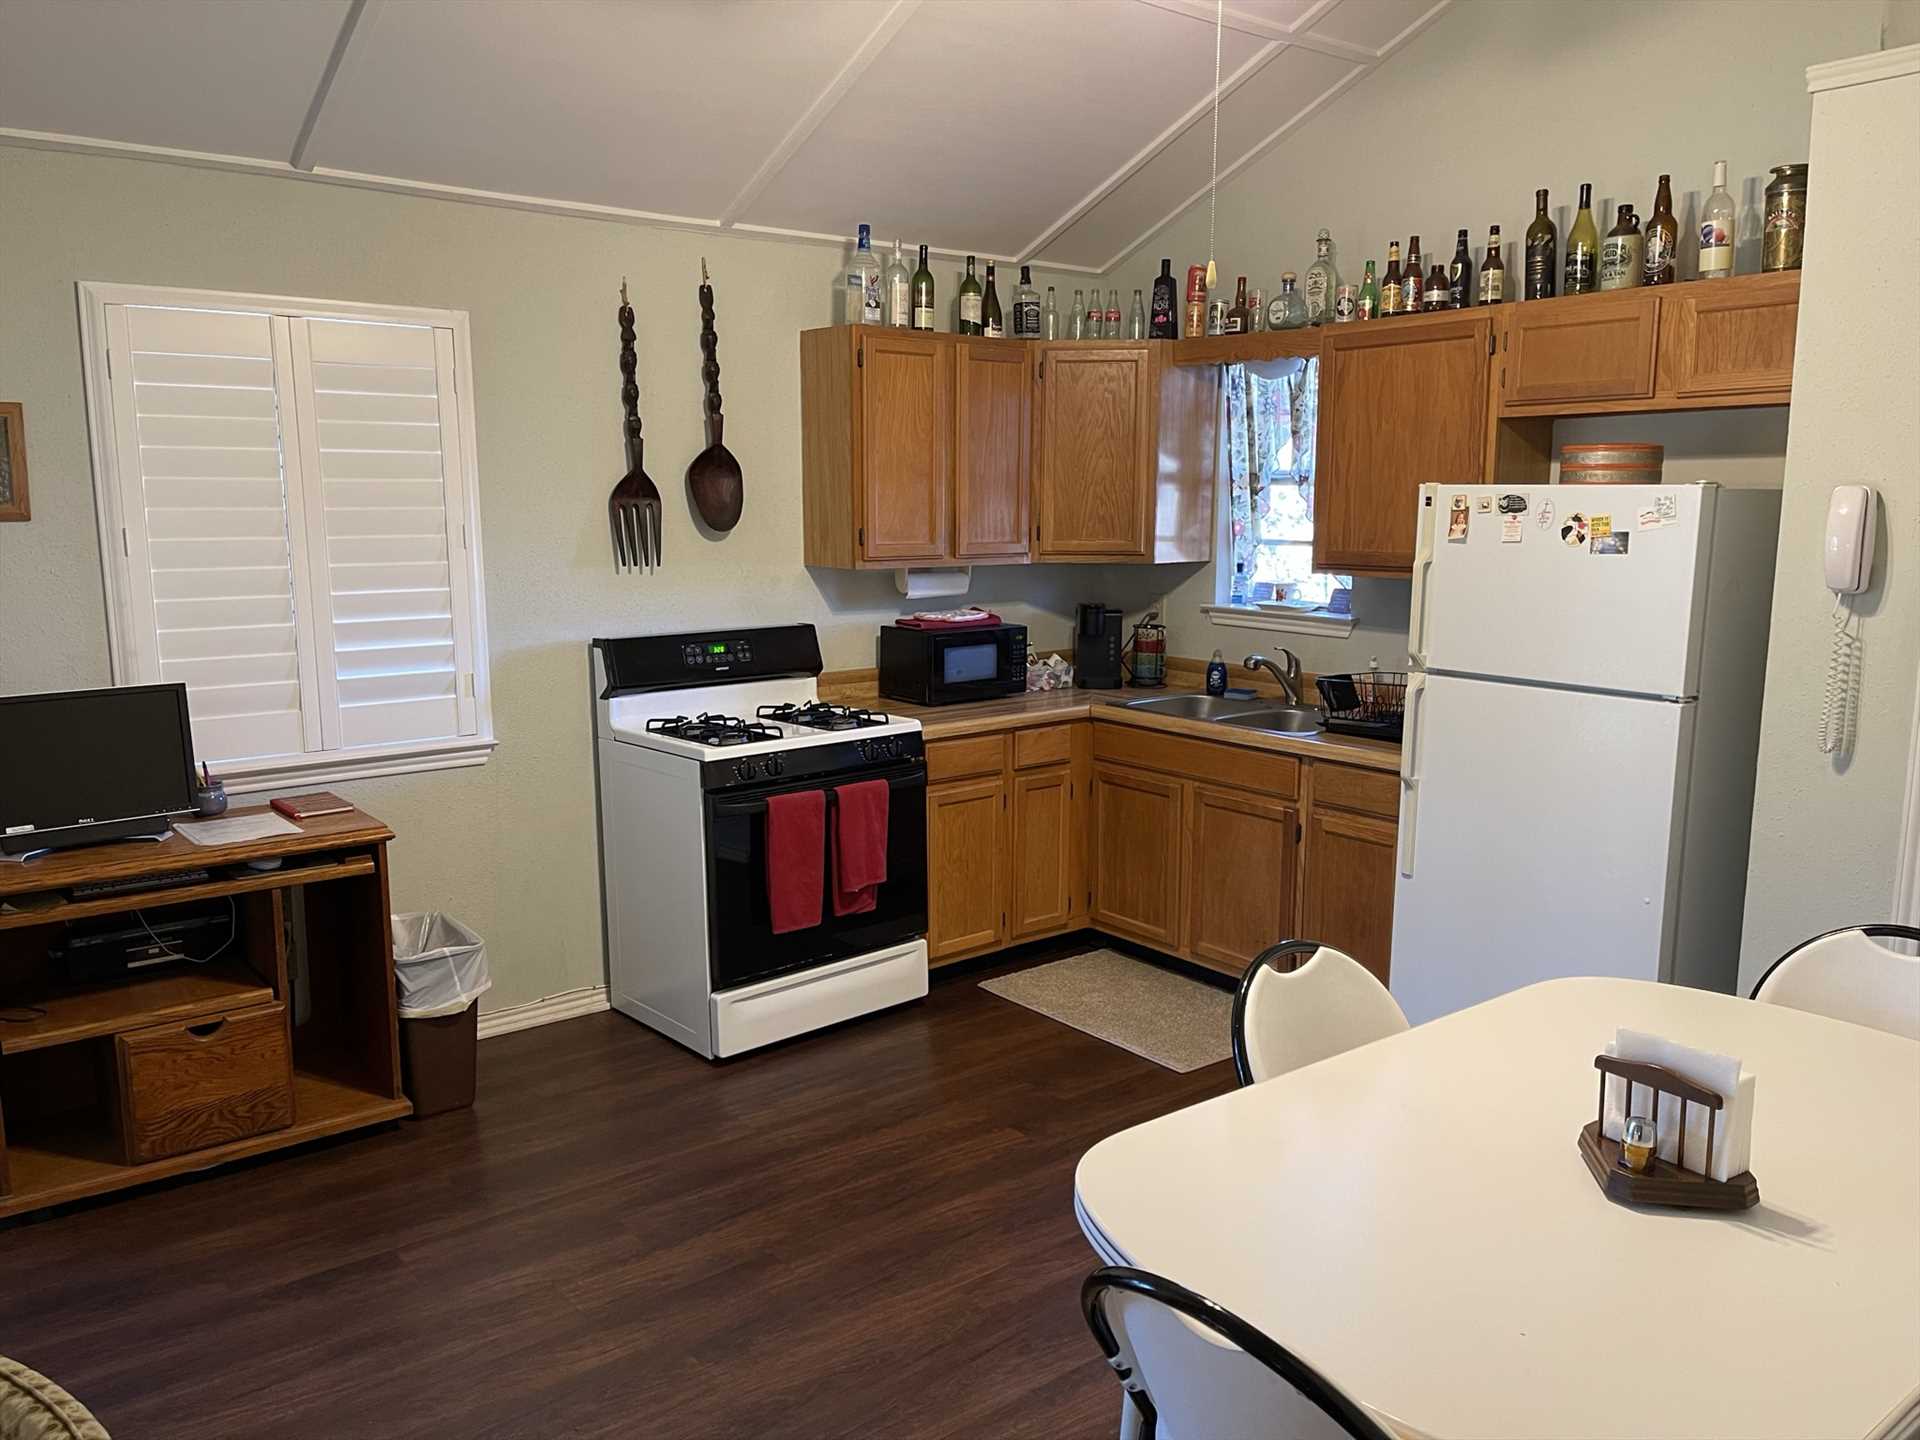                                                 The full kitchen has a fun personality all its own! It's equipped with appliances and utensils, as well as a cozy dining area.